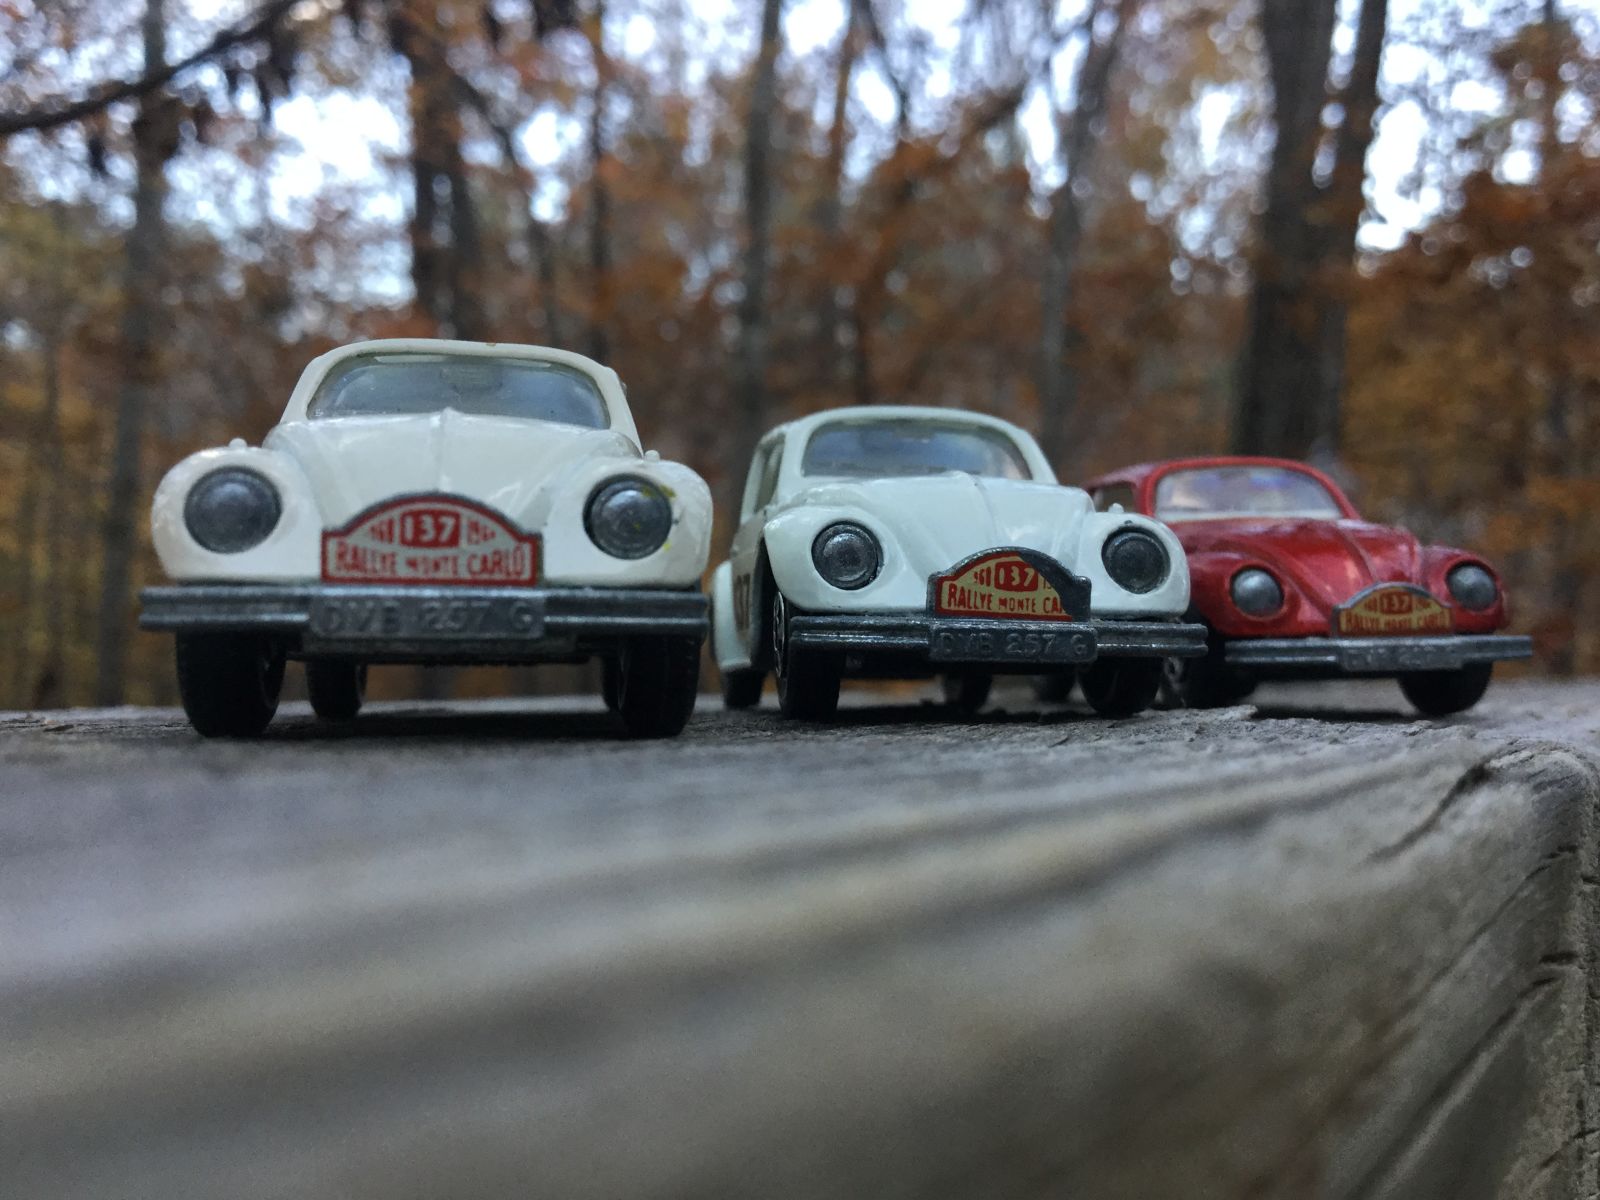 VW Beetle rally car. The one in the middle wasn’t from this HAWL, but the red and white one oj the left were.